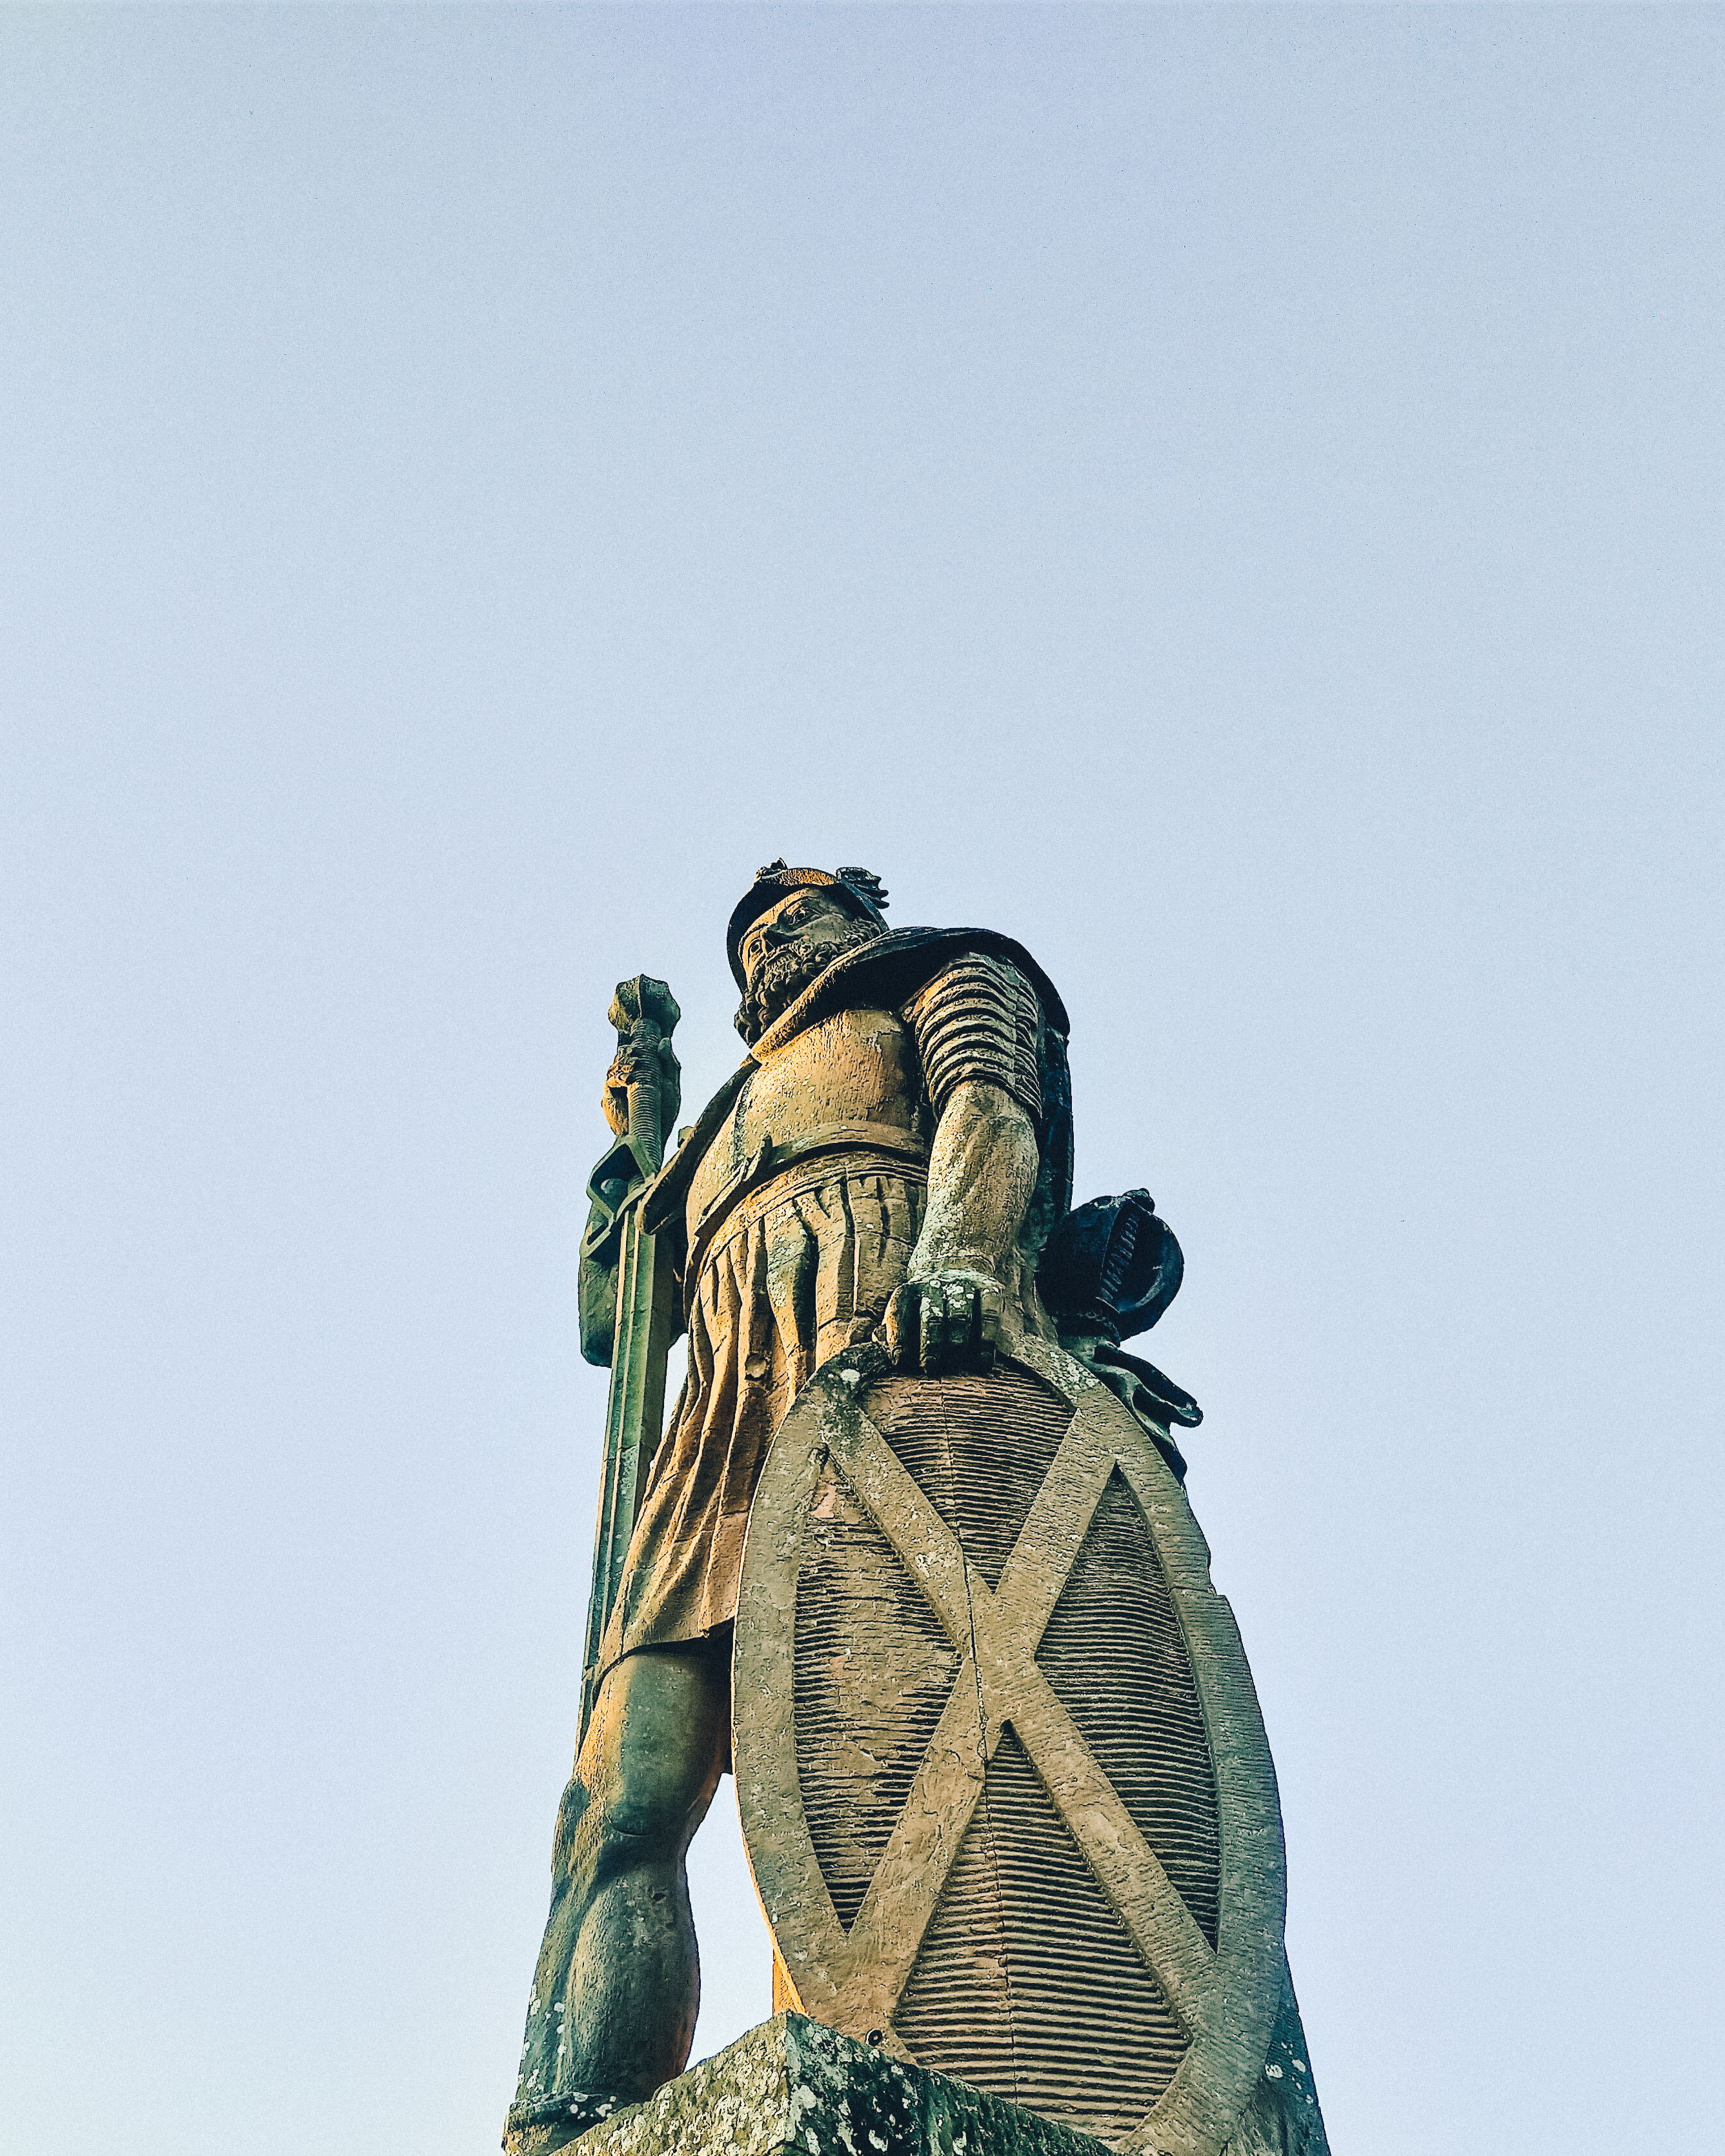 Looking upwards at a large stone statue of William Wallace in the Scottish Borders